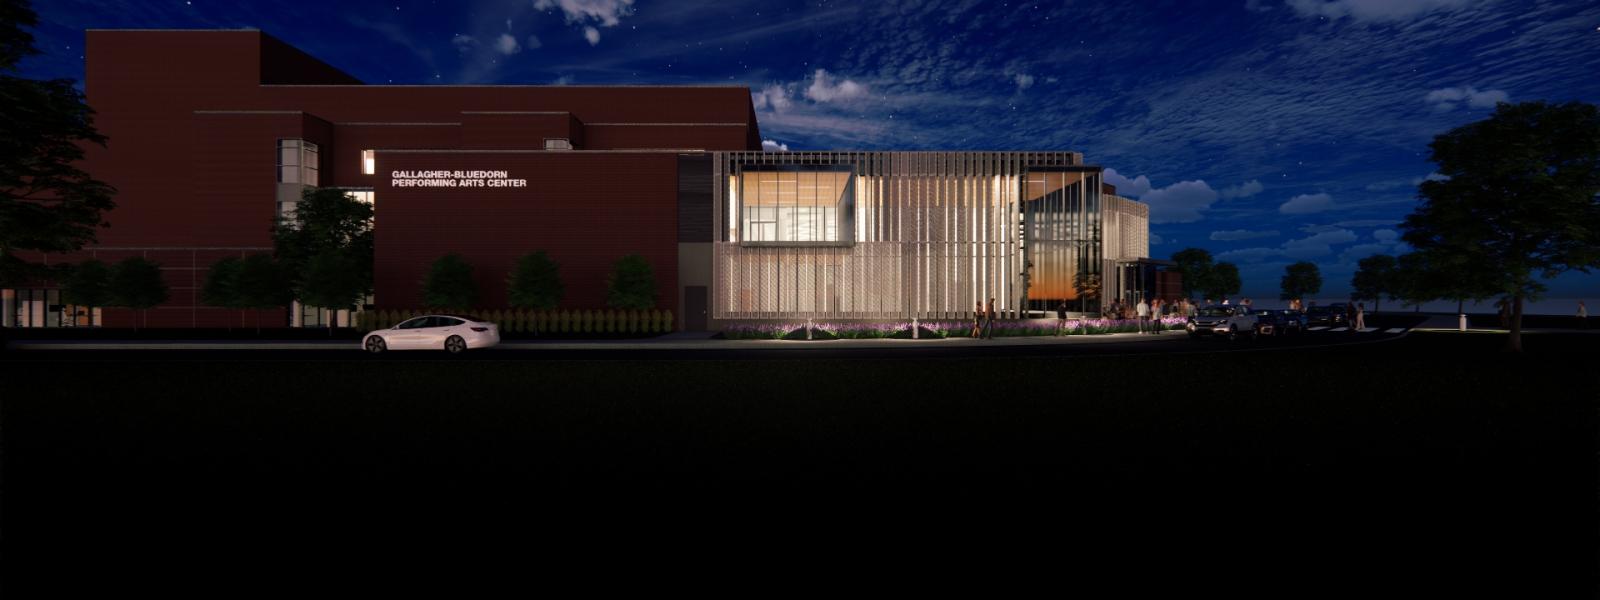 Dusk rendering of the building from the south entrance with expanded driveway